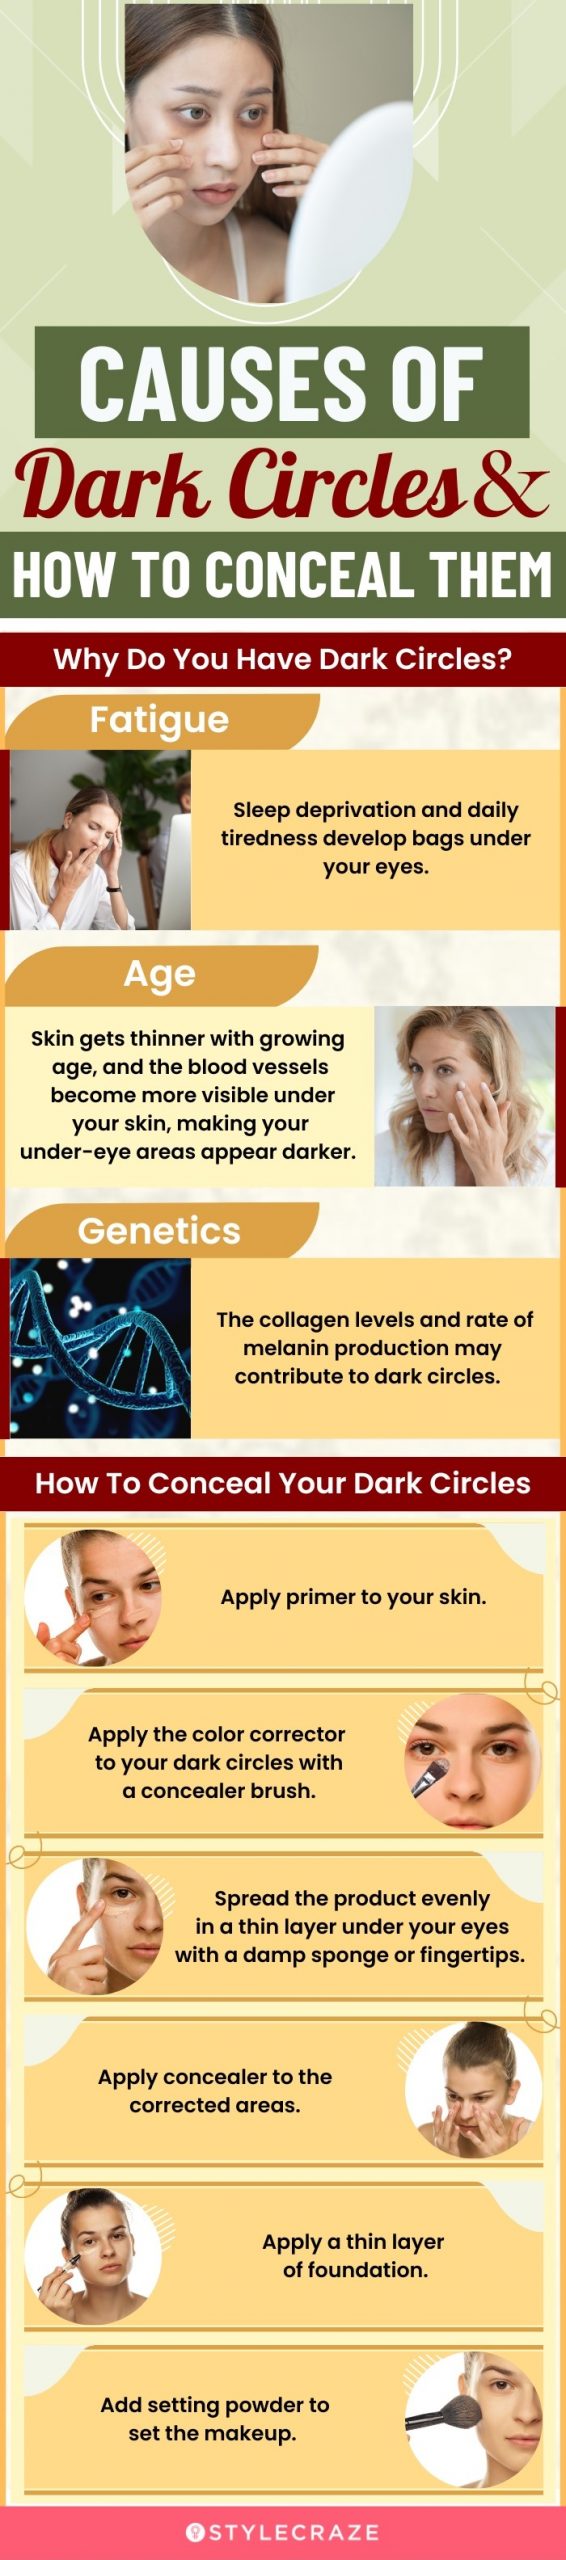 Causes Of Dark Circles & How To Conceal Them